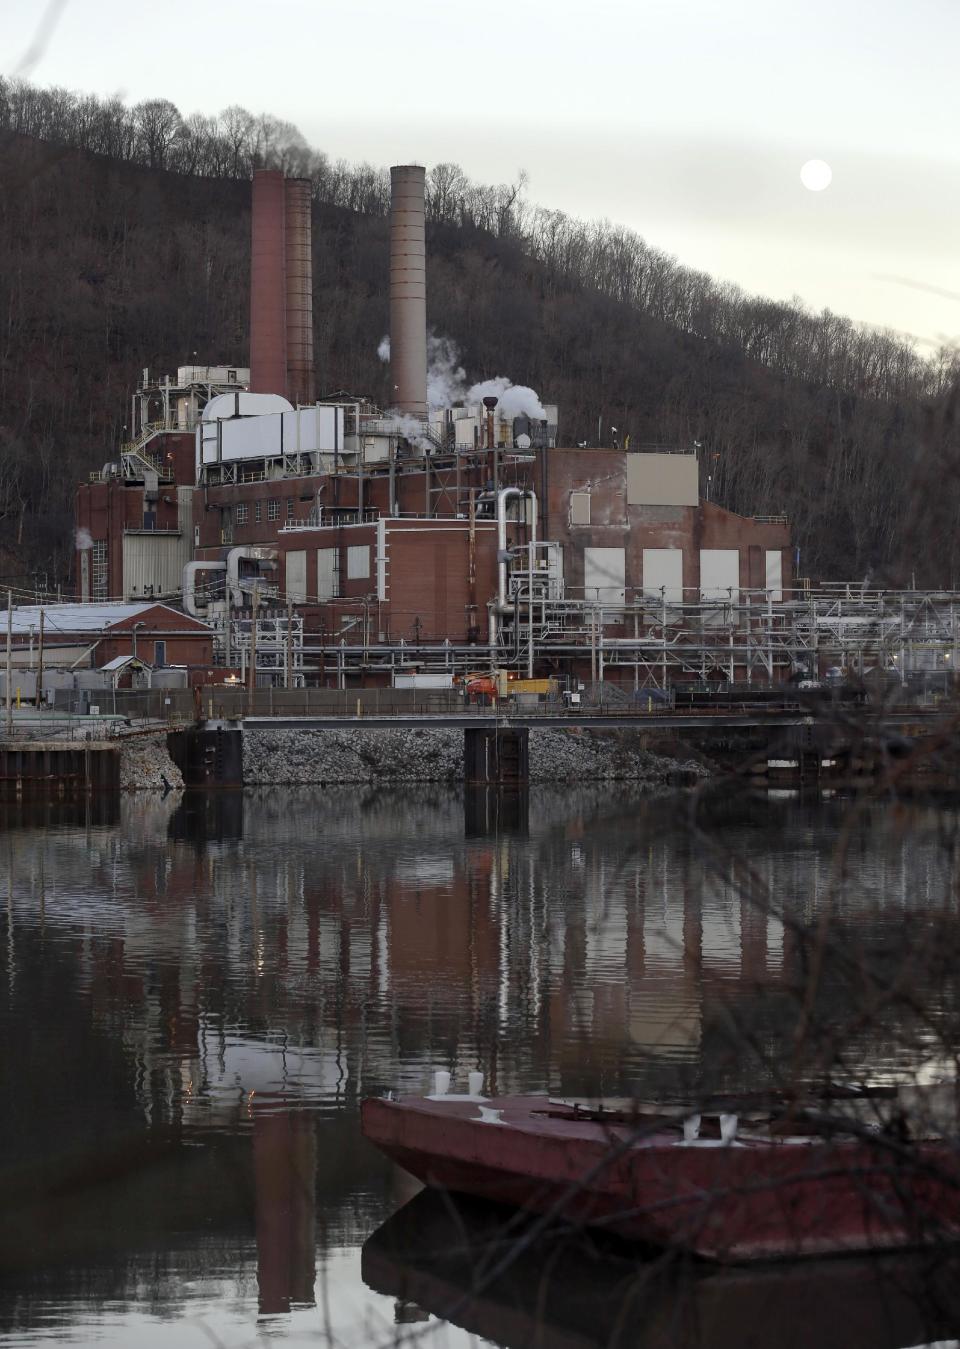 In this photo taken on Tuesday, Jan. 14, 2014, the moon rises over a chemical plant that sits along the banks of the Kanawha river in Marmet, W.Va. While no one became seriously ill from last week's chemical spill a storage facility in Charleston, W.Va, some homeland security experts said the emergency was proof the United States has not done nearly enough to protect water systems from accidental spills or deliberate contamination. (AP Photo/Steve Helber)